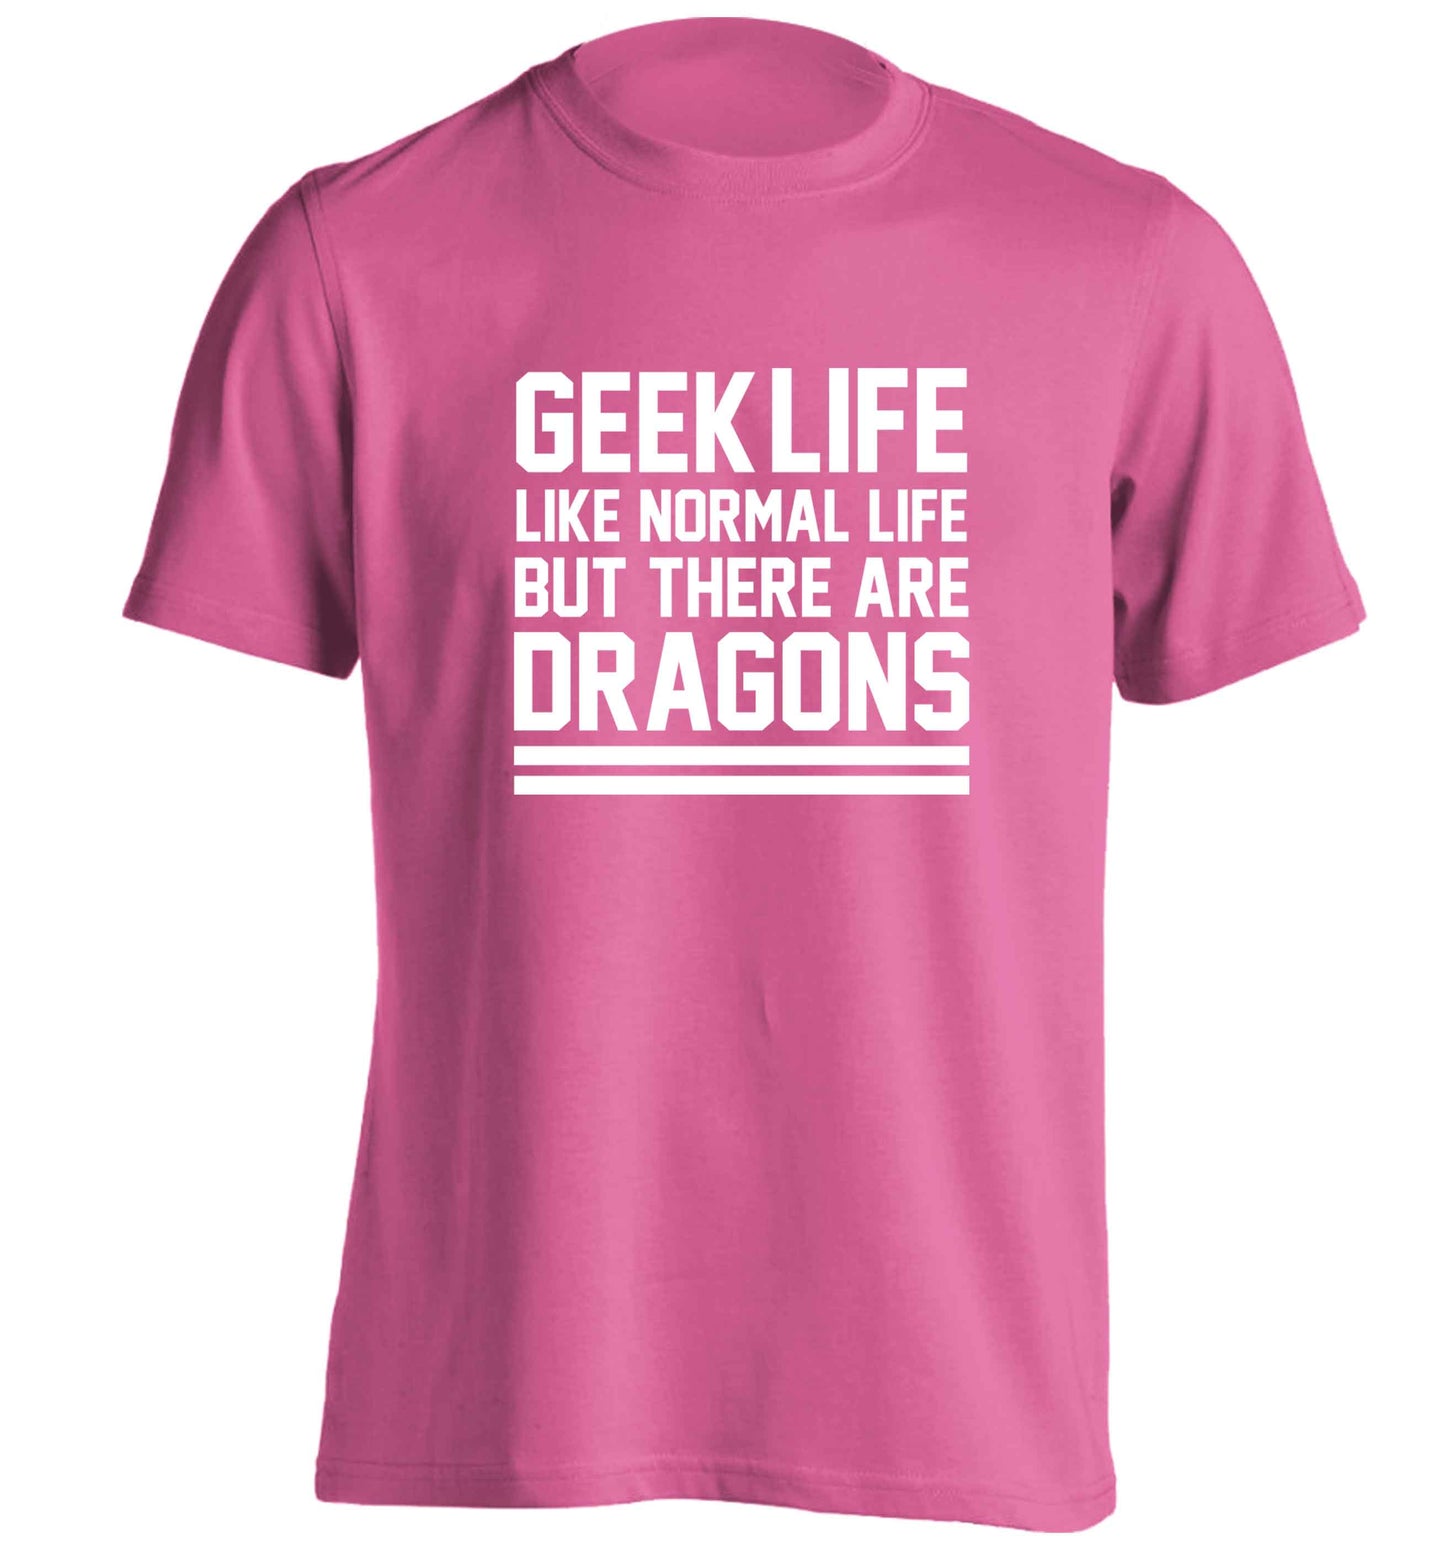 Geek life like normal life but there are dragons adults unisex pink Tshirt 2XL